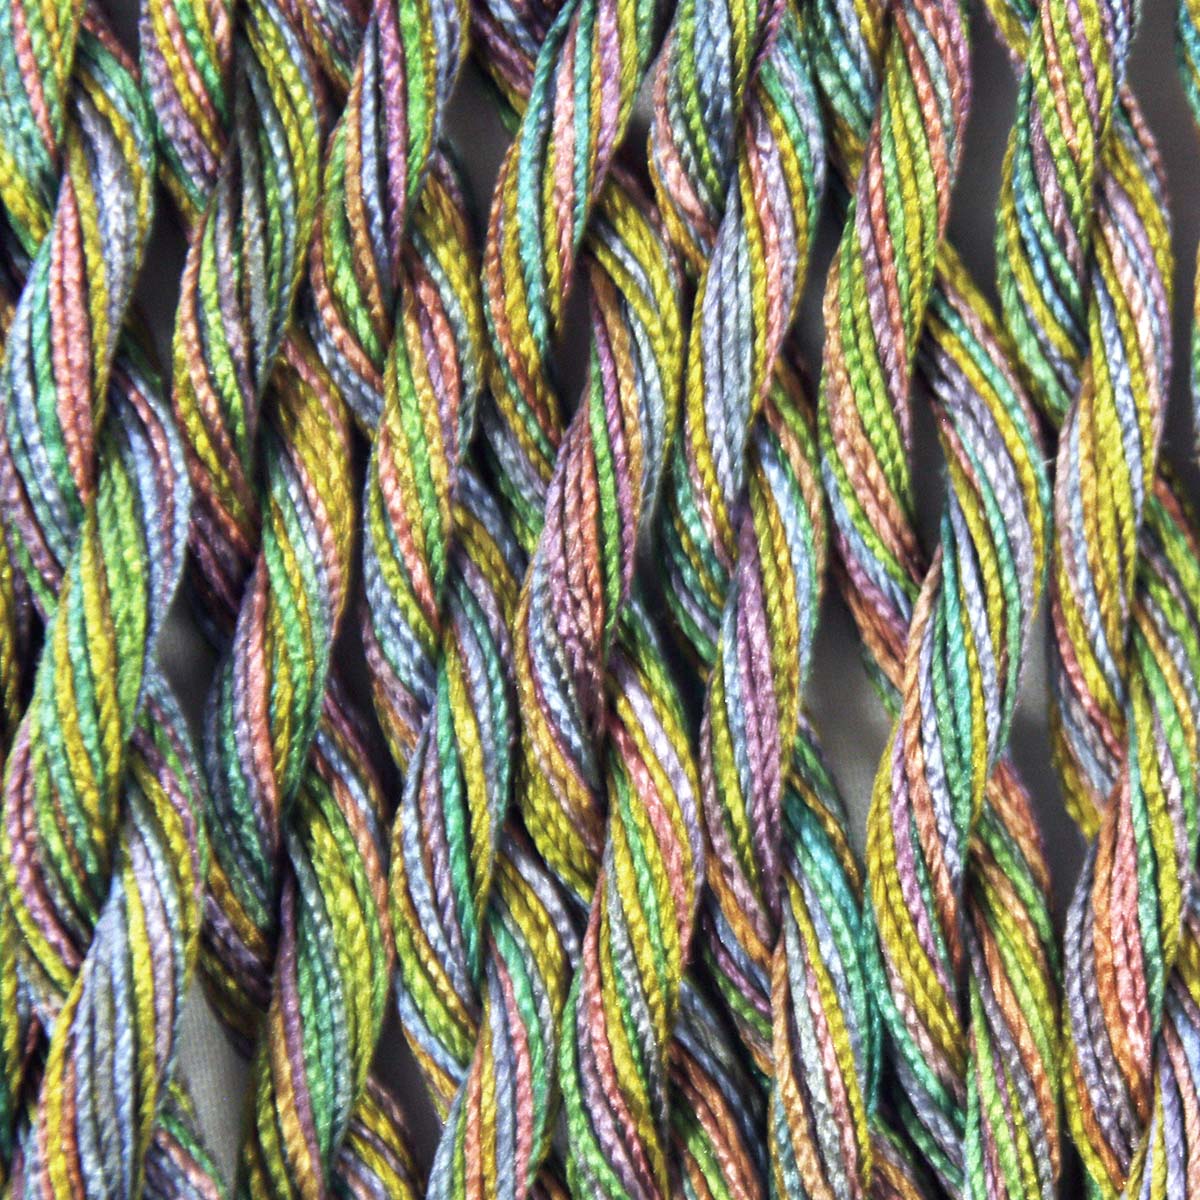 www.colourstreams.com.au Colour Streams Hand Dyed Silk Threads Silken Strands Ophir Exotic Lights Aurora Slow Stitch Embroidery Textile Arts Fibre DL 34 Purples Greens Blues Pinks Golds